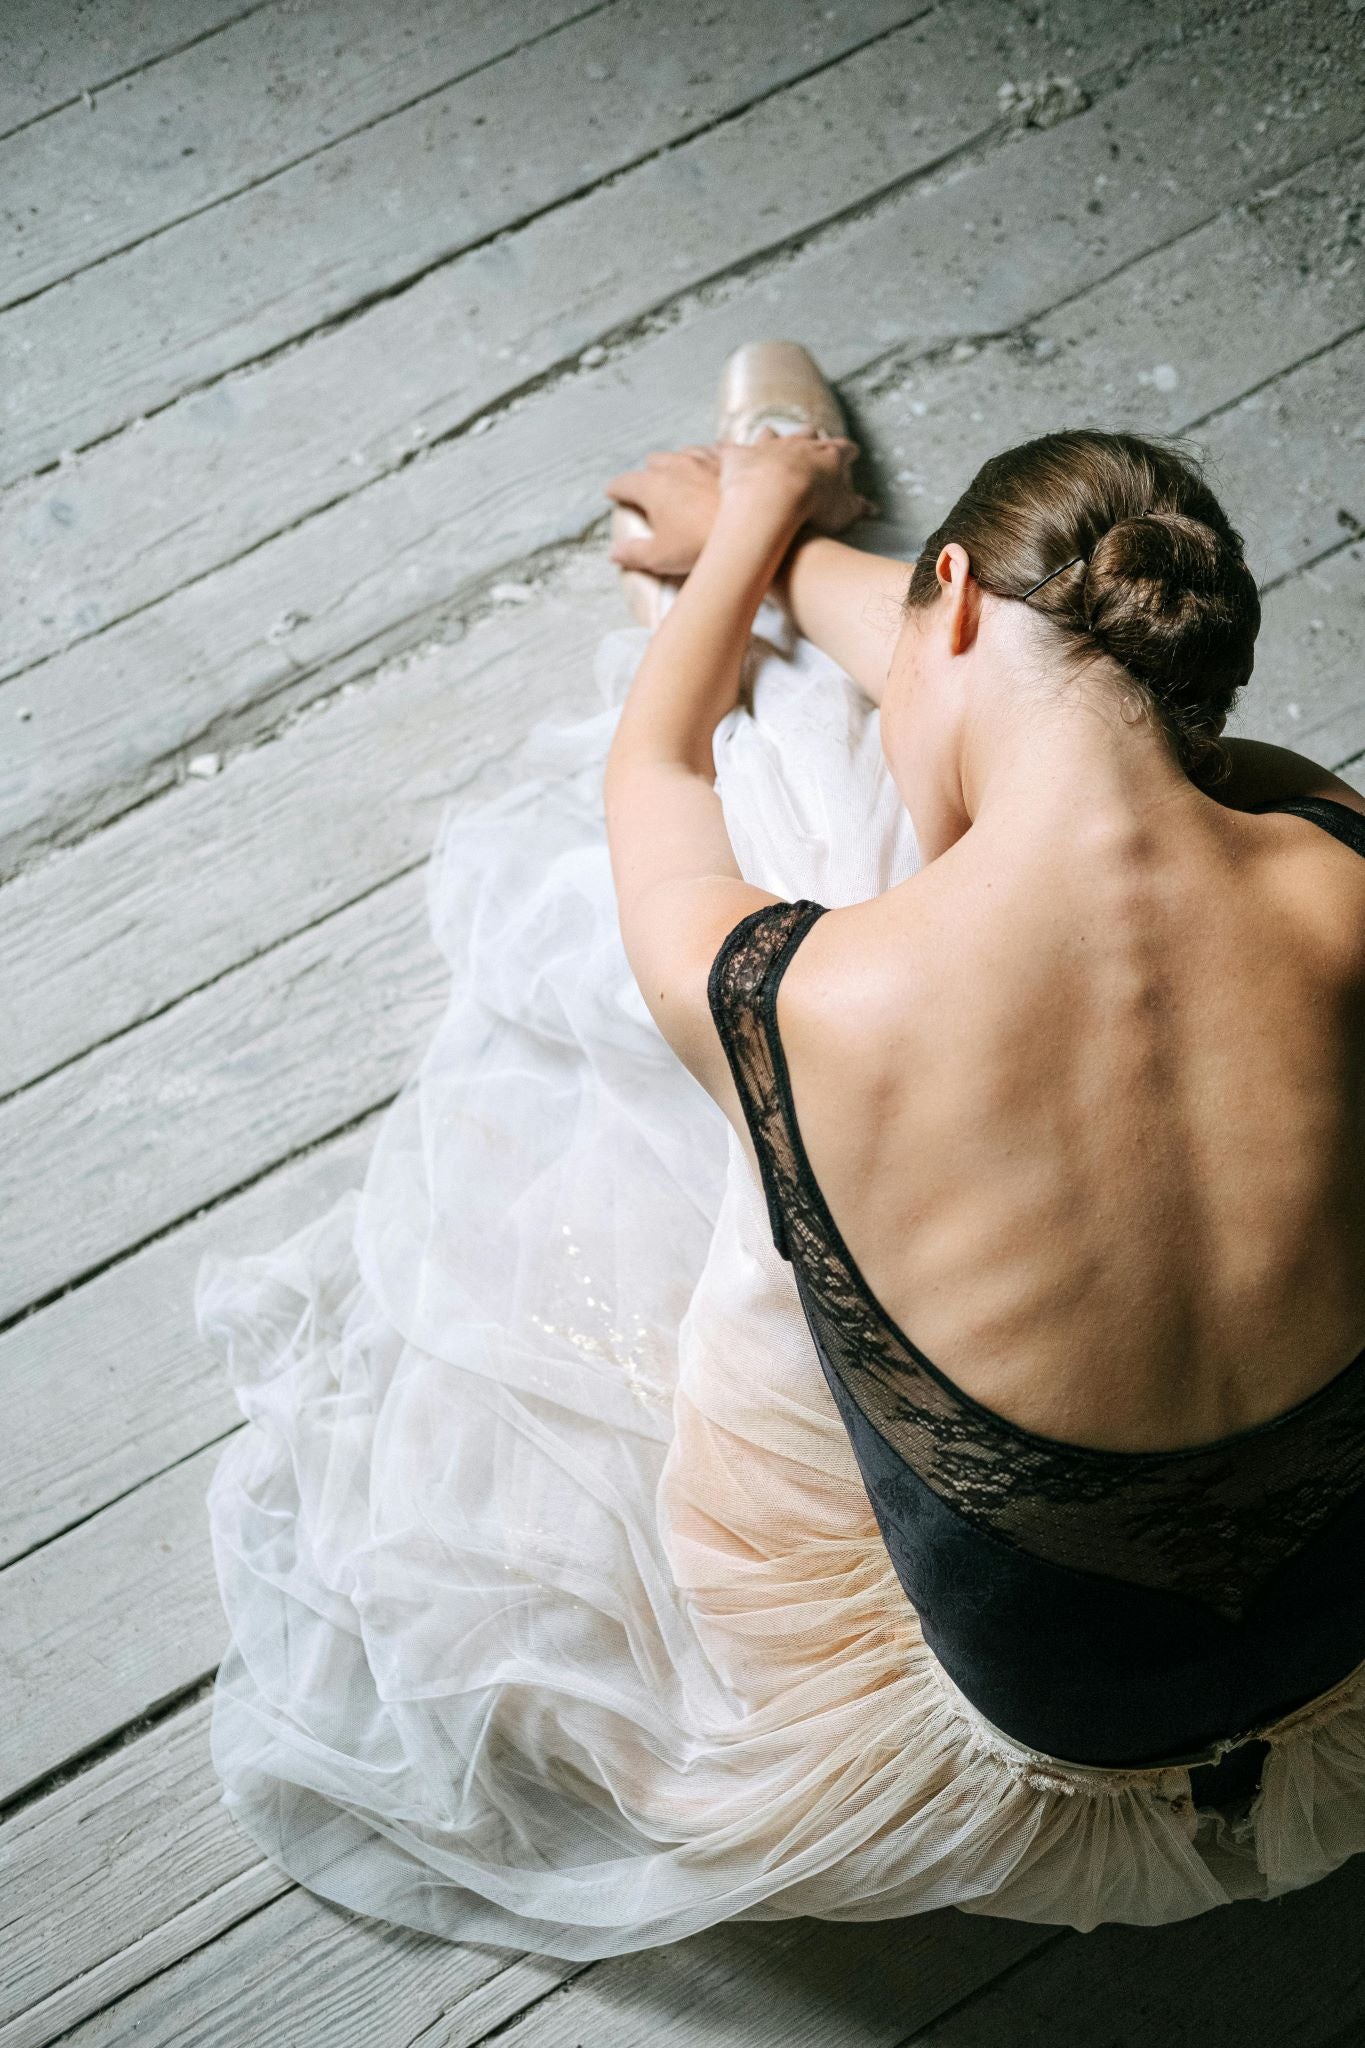 A ballet dancer stretching on a wooden floor, wearing a black lace leotard and a white tutu. Her hair is styled in a bun as she leans forward, elegantly showcasing her skin, back muscles, spine, and ribs.